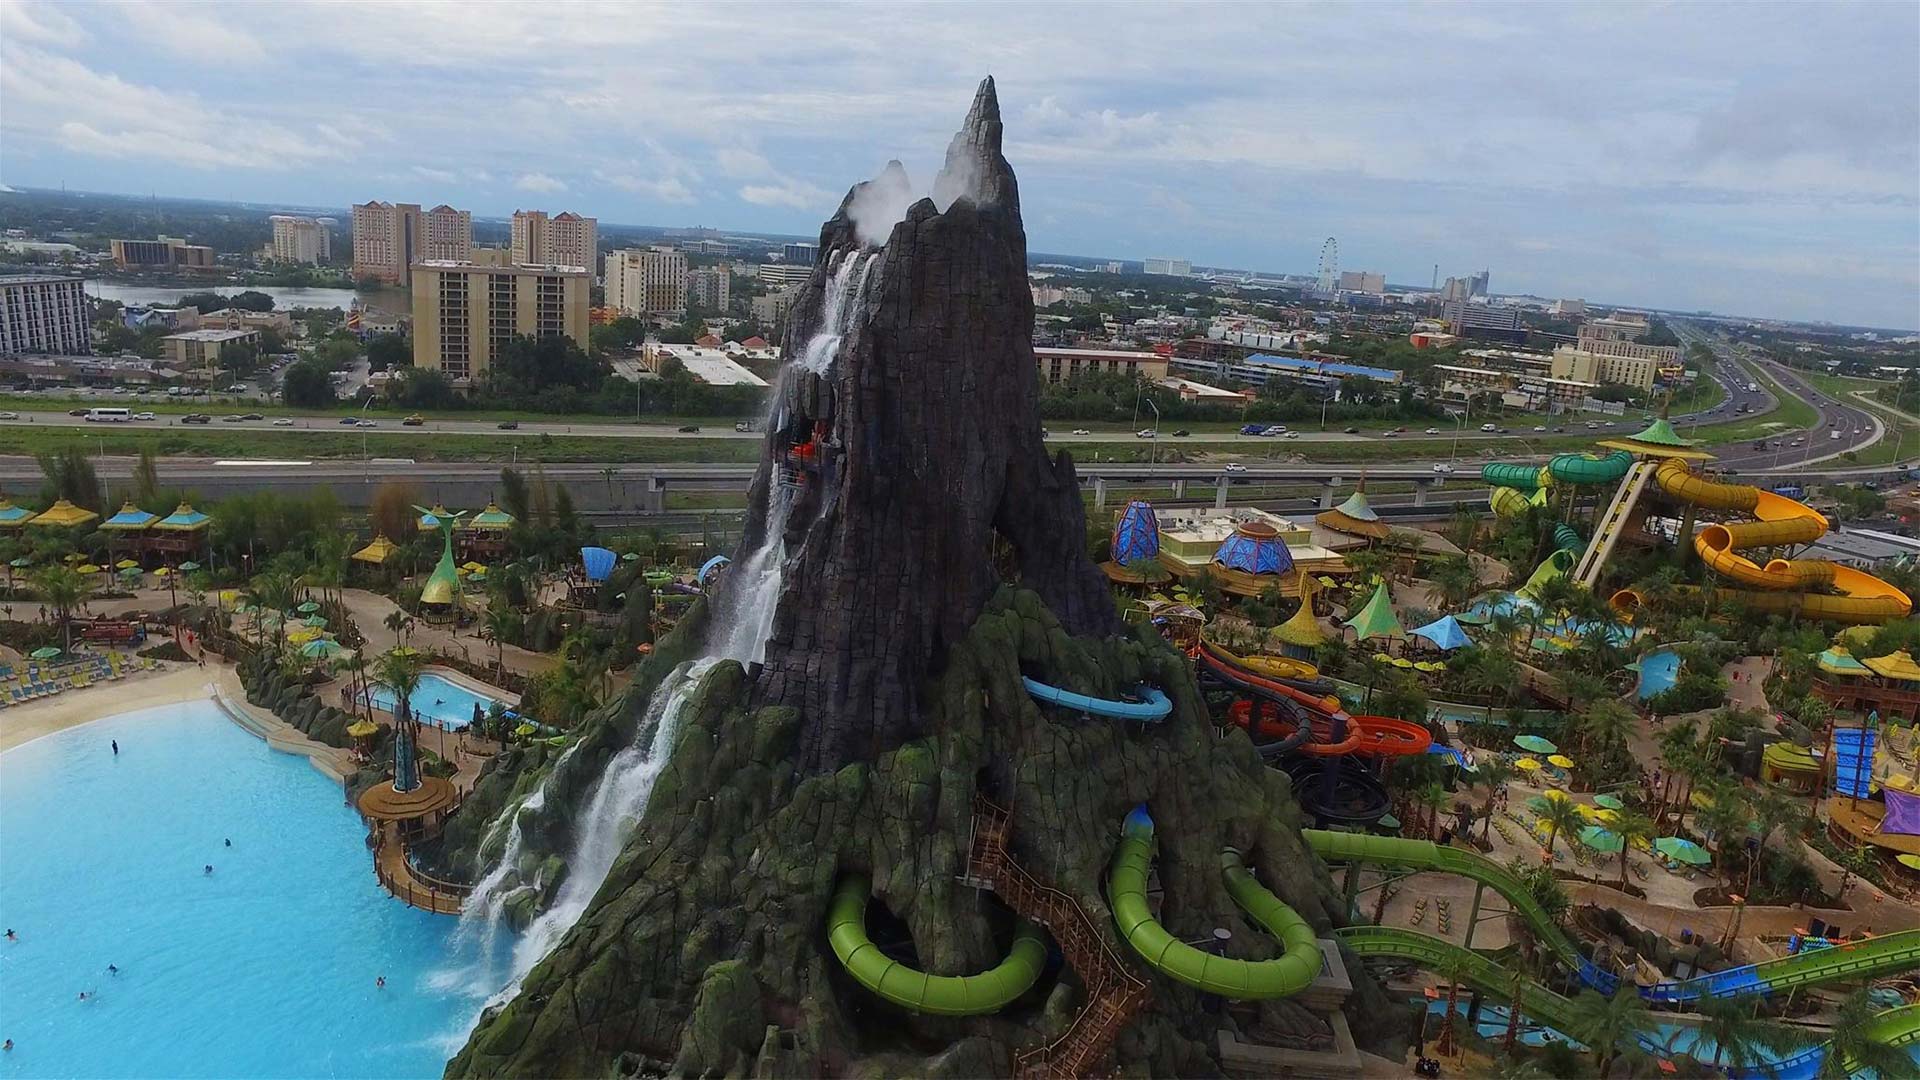 Towering Volcano Created With Cemex Concrete In Orlando